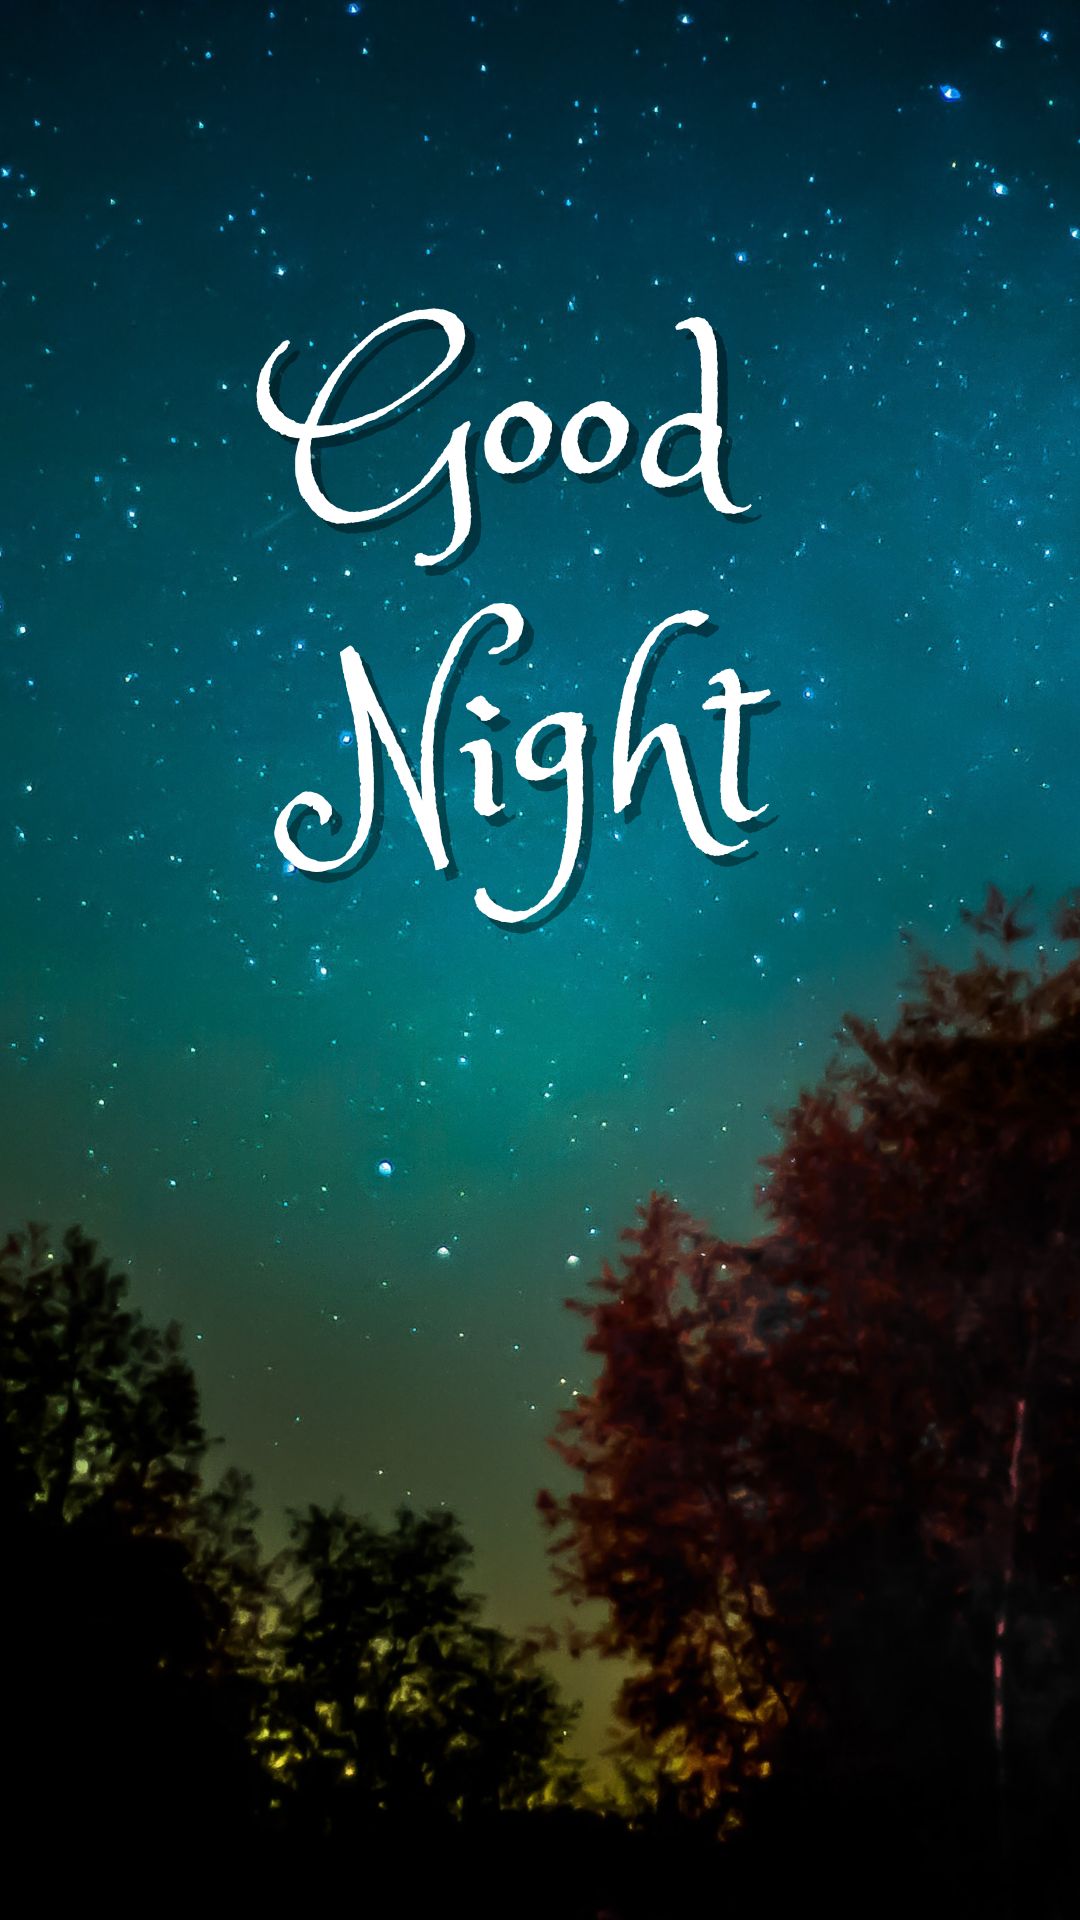 good night images instagram story turquoise night sky